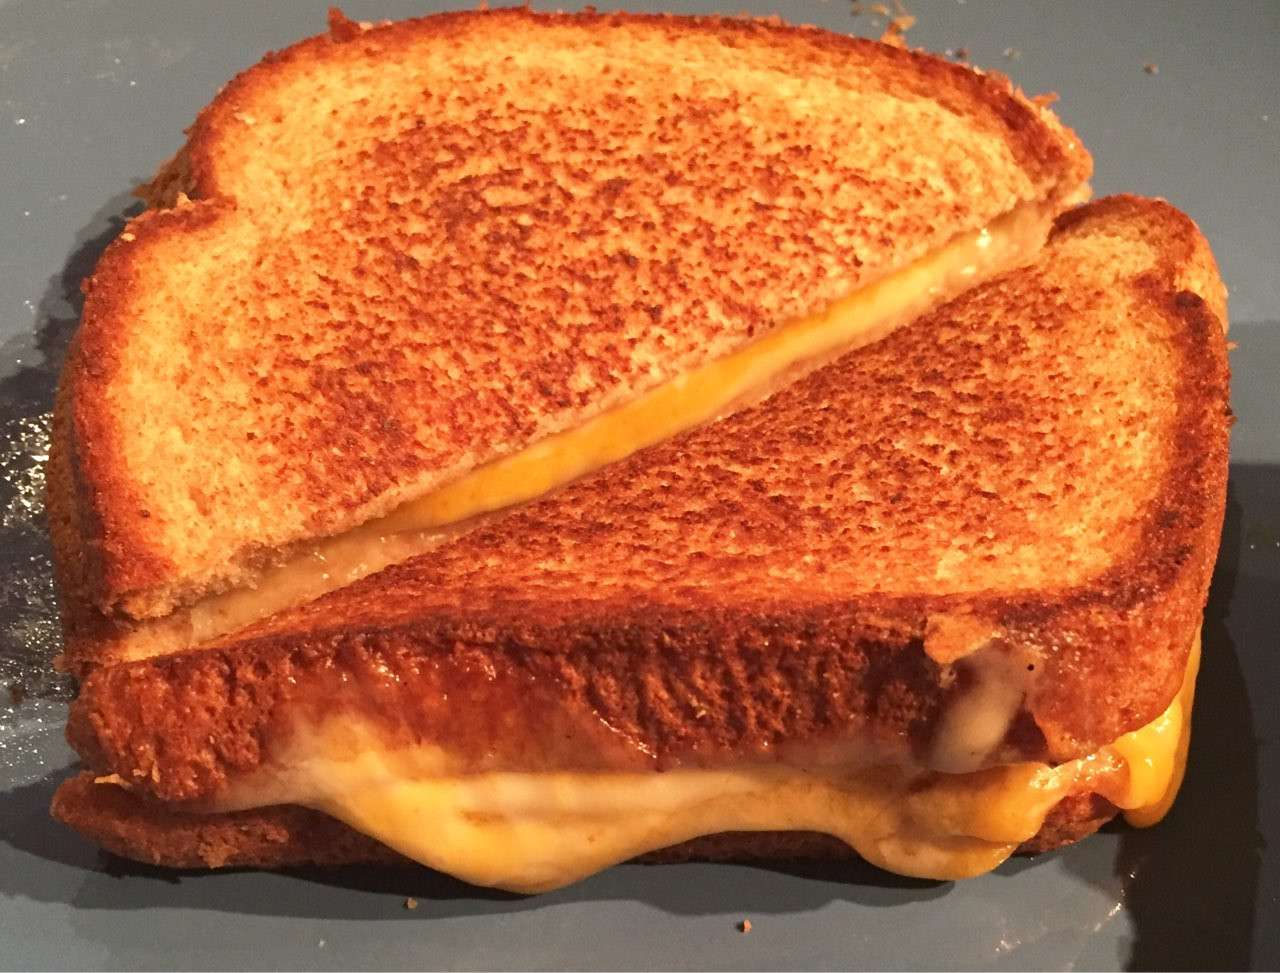 Best 35 Calories In Grilled Cheese Sandwich On White Bread â Home ...